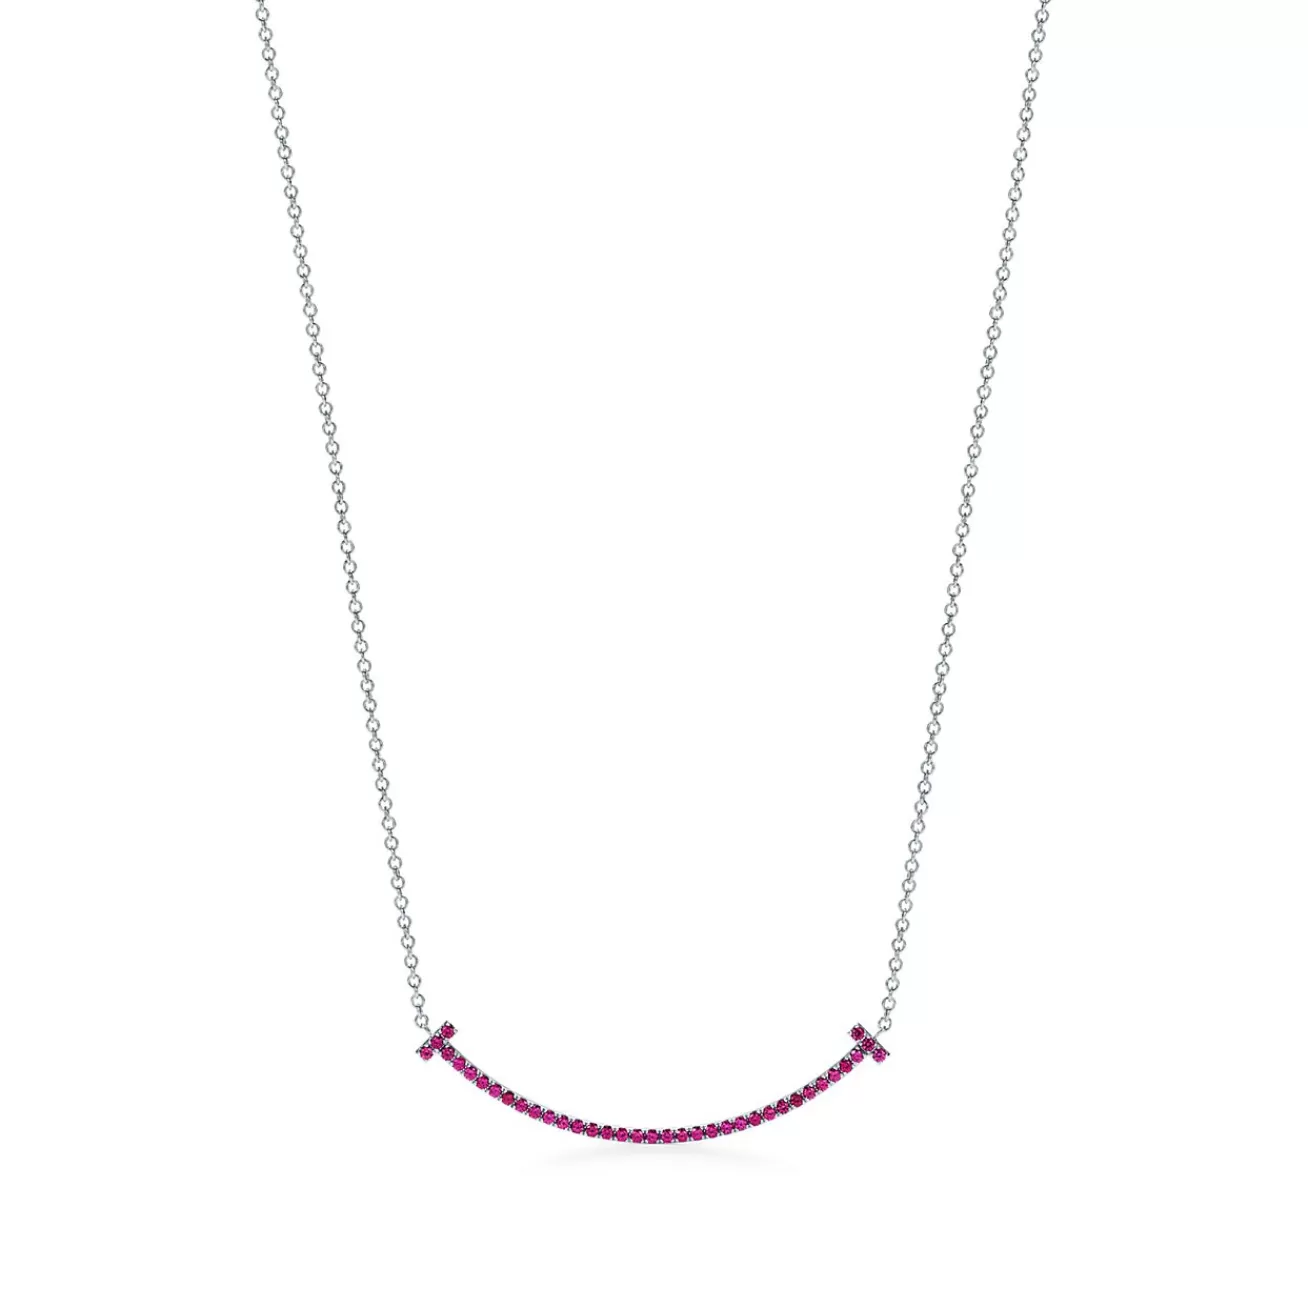 Tiffany & Co. Tiffany T smile pendant in 18k white gold with rubies, small. | ^ Necklaces & Pendants | Colored Gemstone Jewelry